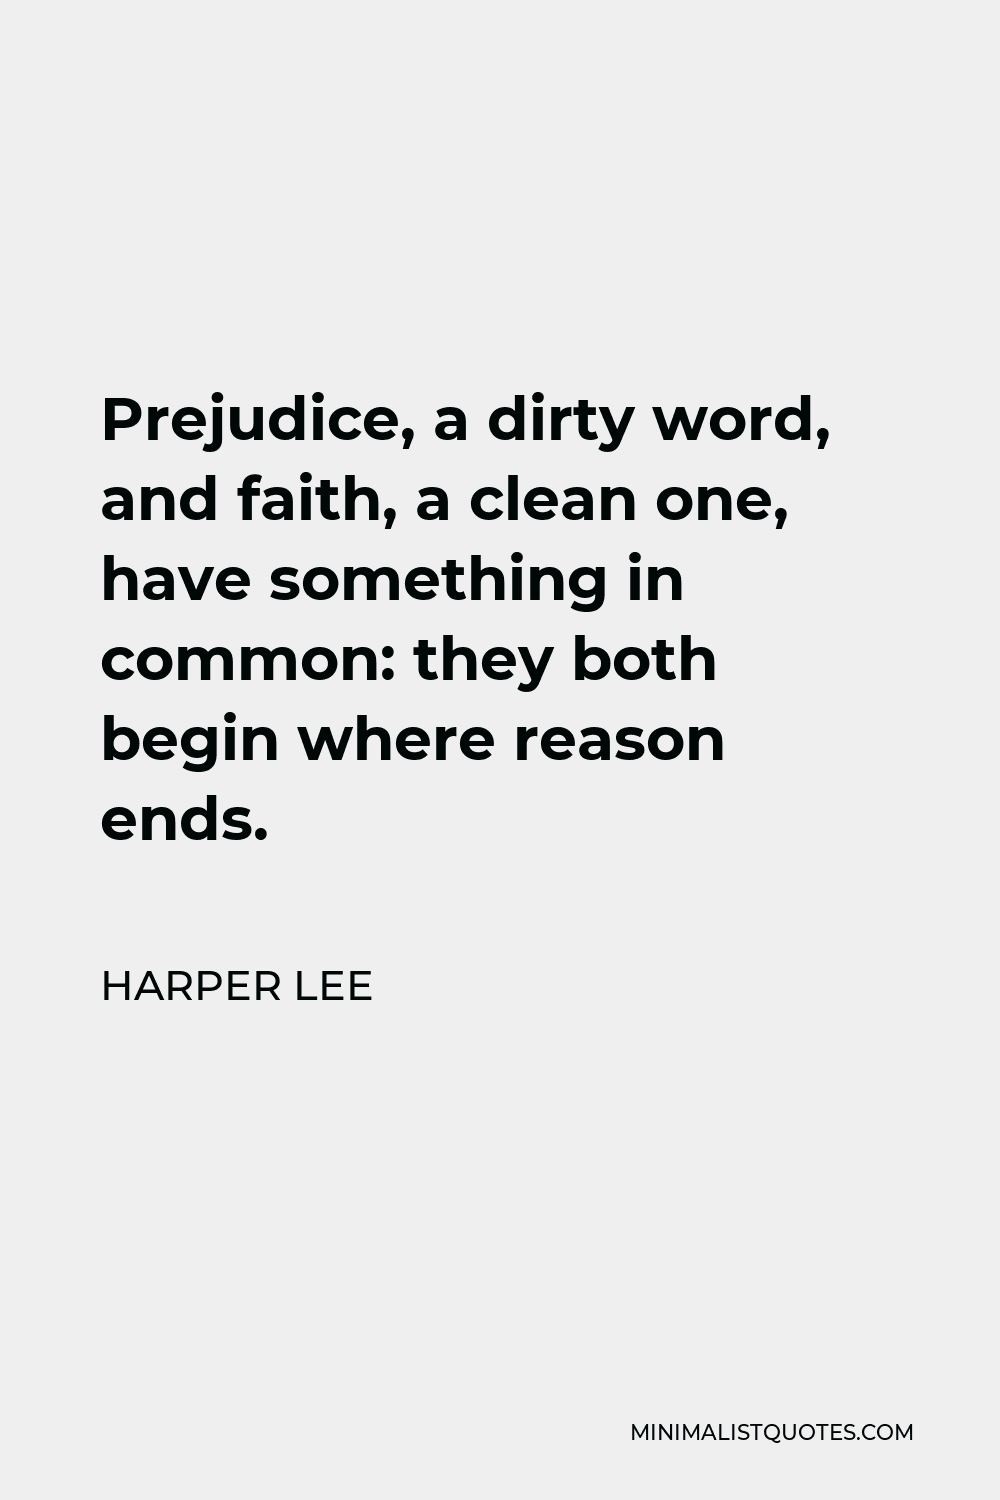 Harper Lee Quote - Prejudice, a dirty word, and faith, a clean one, have something in common: they both begin where reason ends.